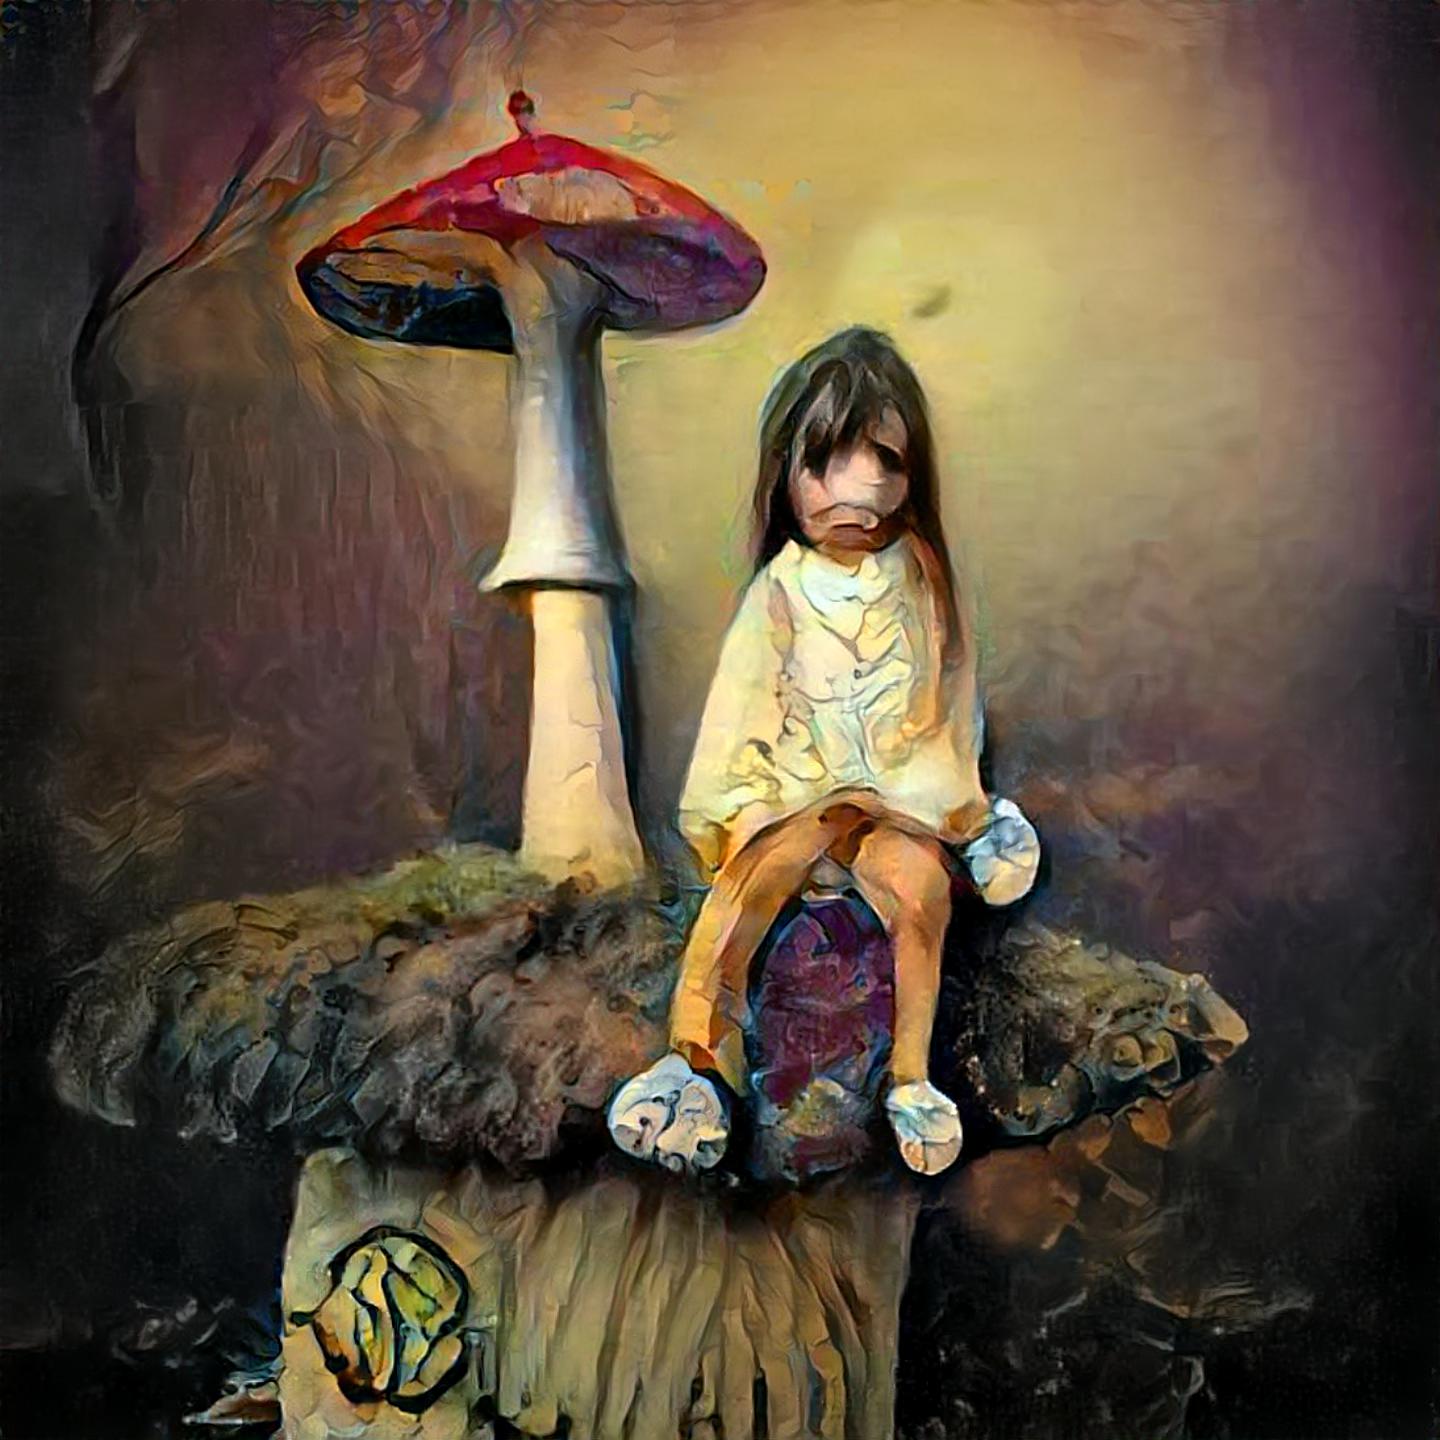 The Contemplation of Mushrooms